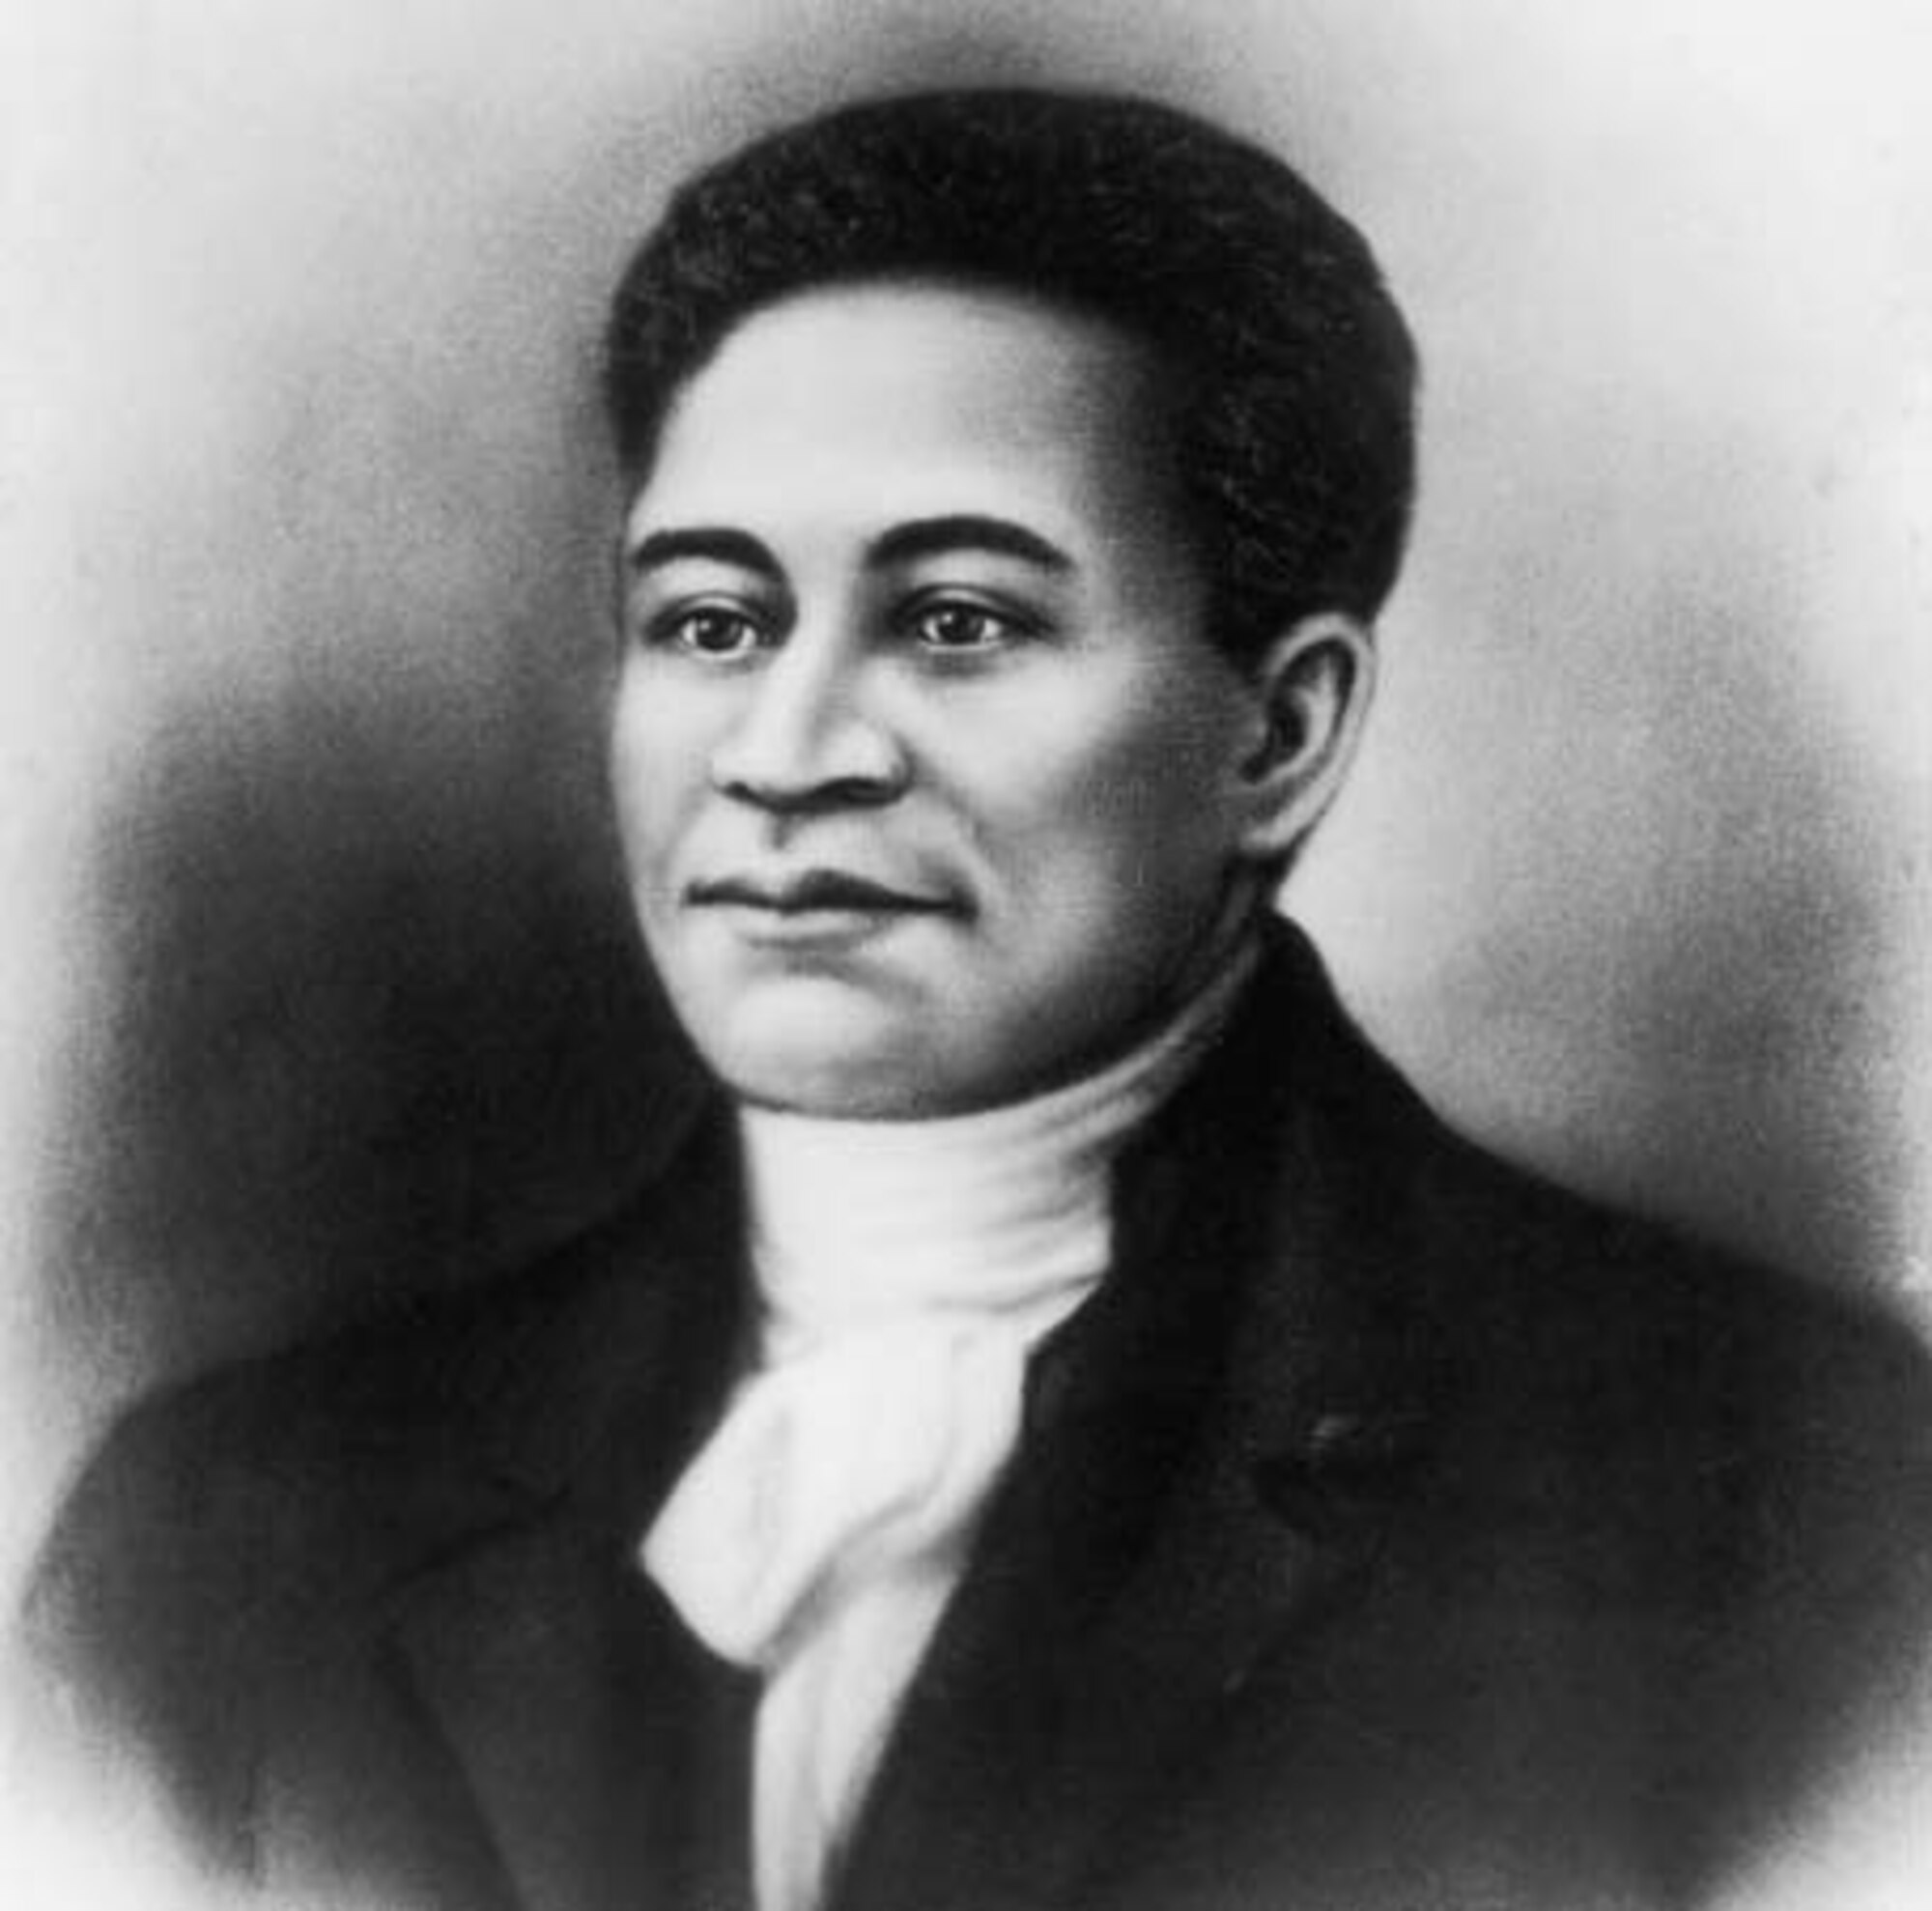 Circa 1750, portrait of American patriot Crispus Attucks (circa 1723 to 1770), possibly a runaway slave, who was killed by British troops in the Boston Massacre in 1770. (Courtesy photo/Getty Images) 